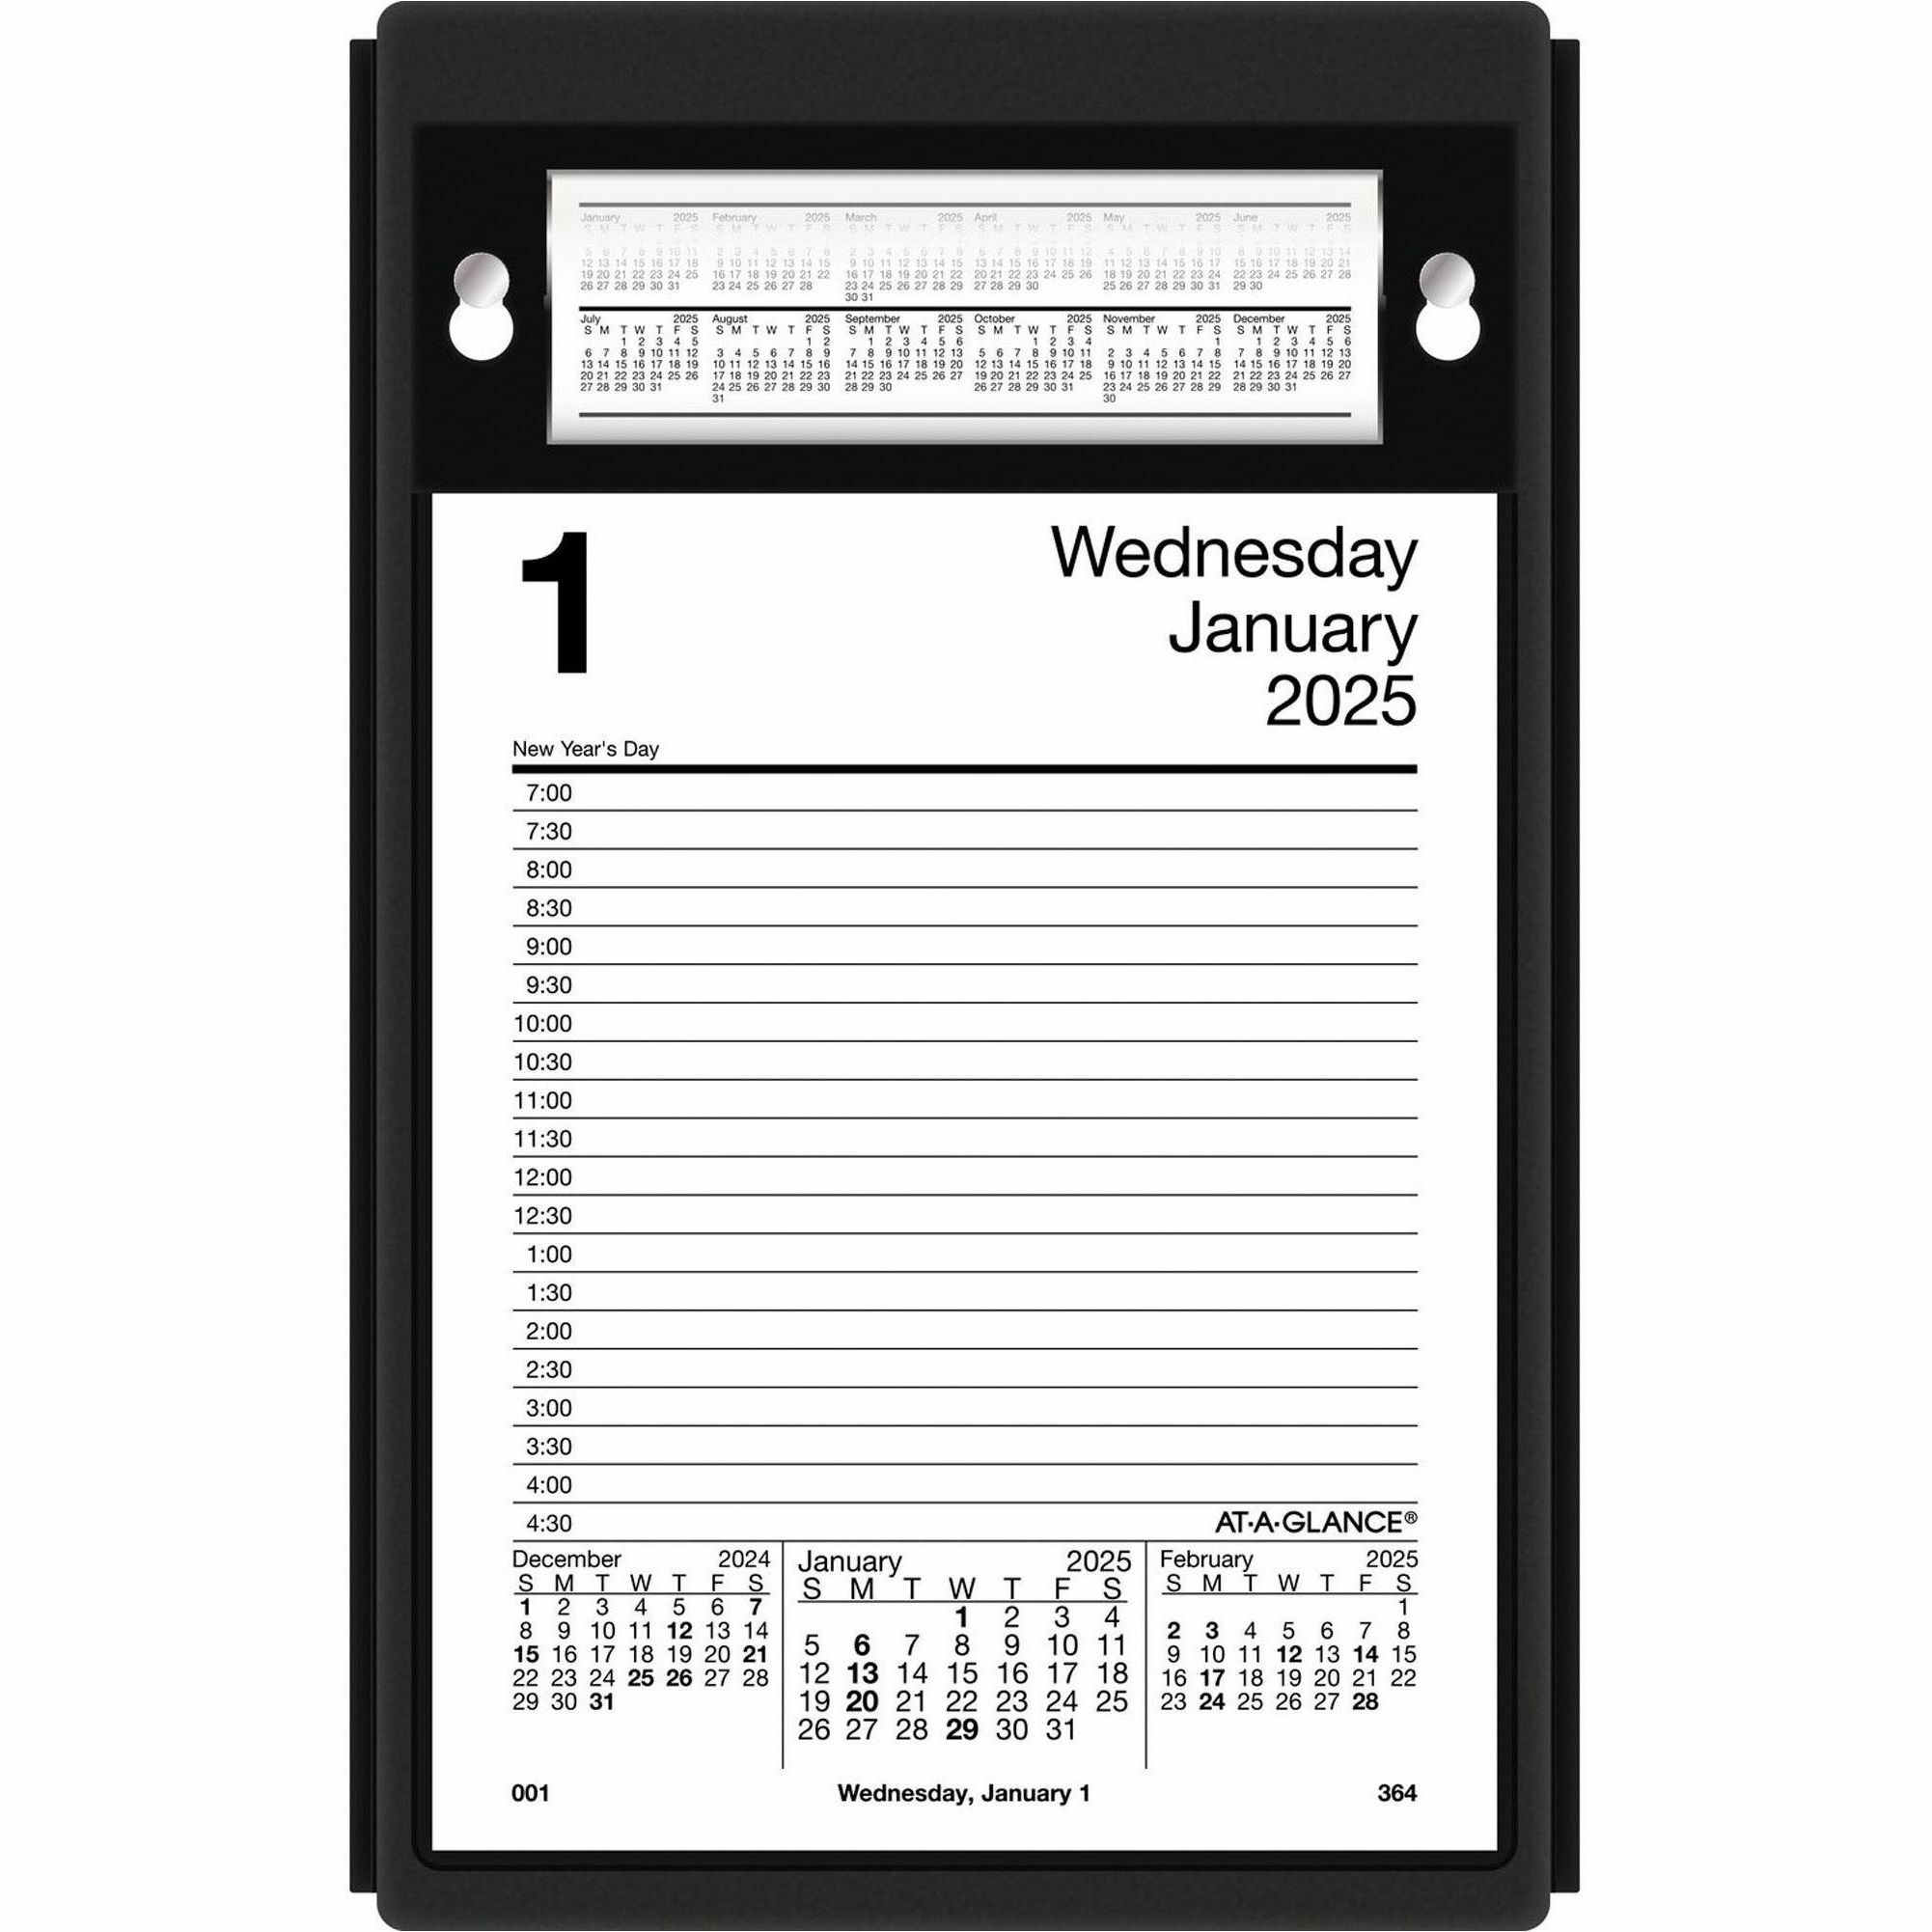 AtAGlance Daily PadStyle Desk Calendar Refill Julian Dates Daily 12 Month January